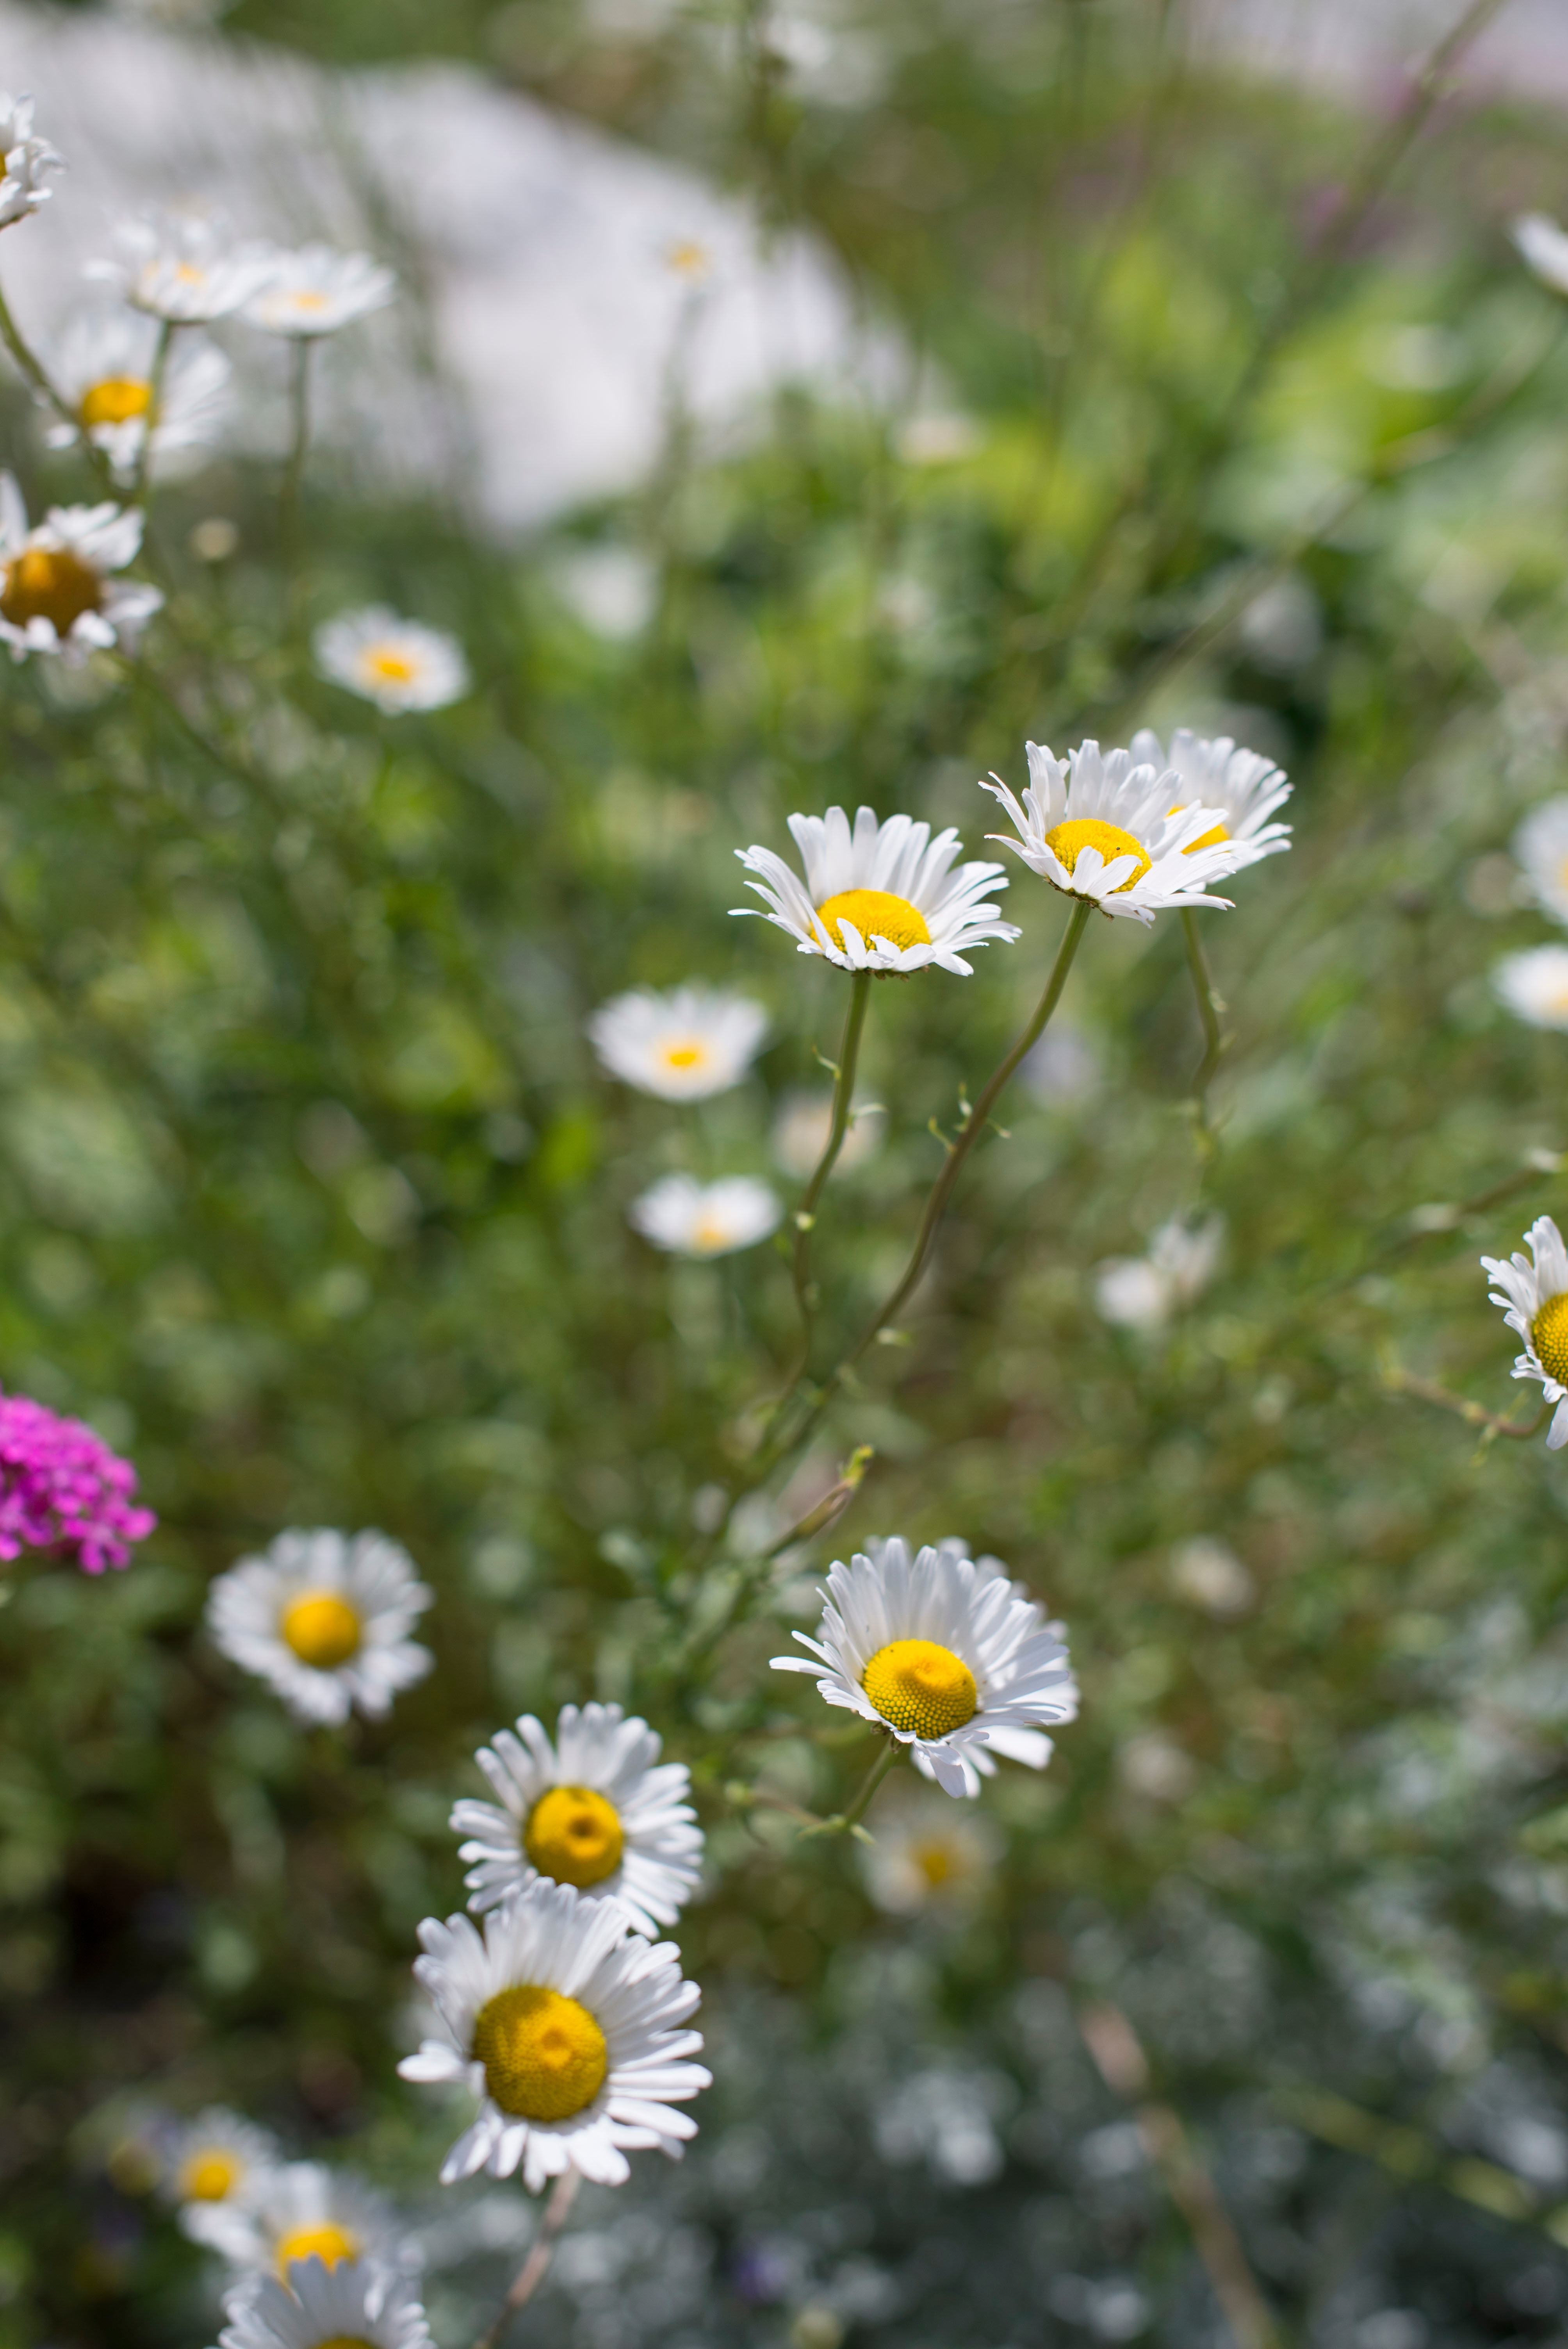 tilt shift photo of white and yellow daisy flowers